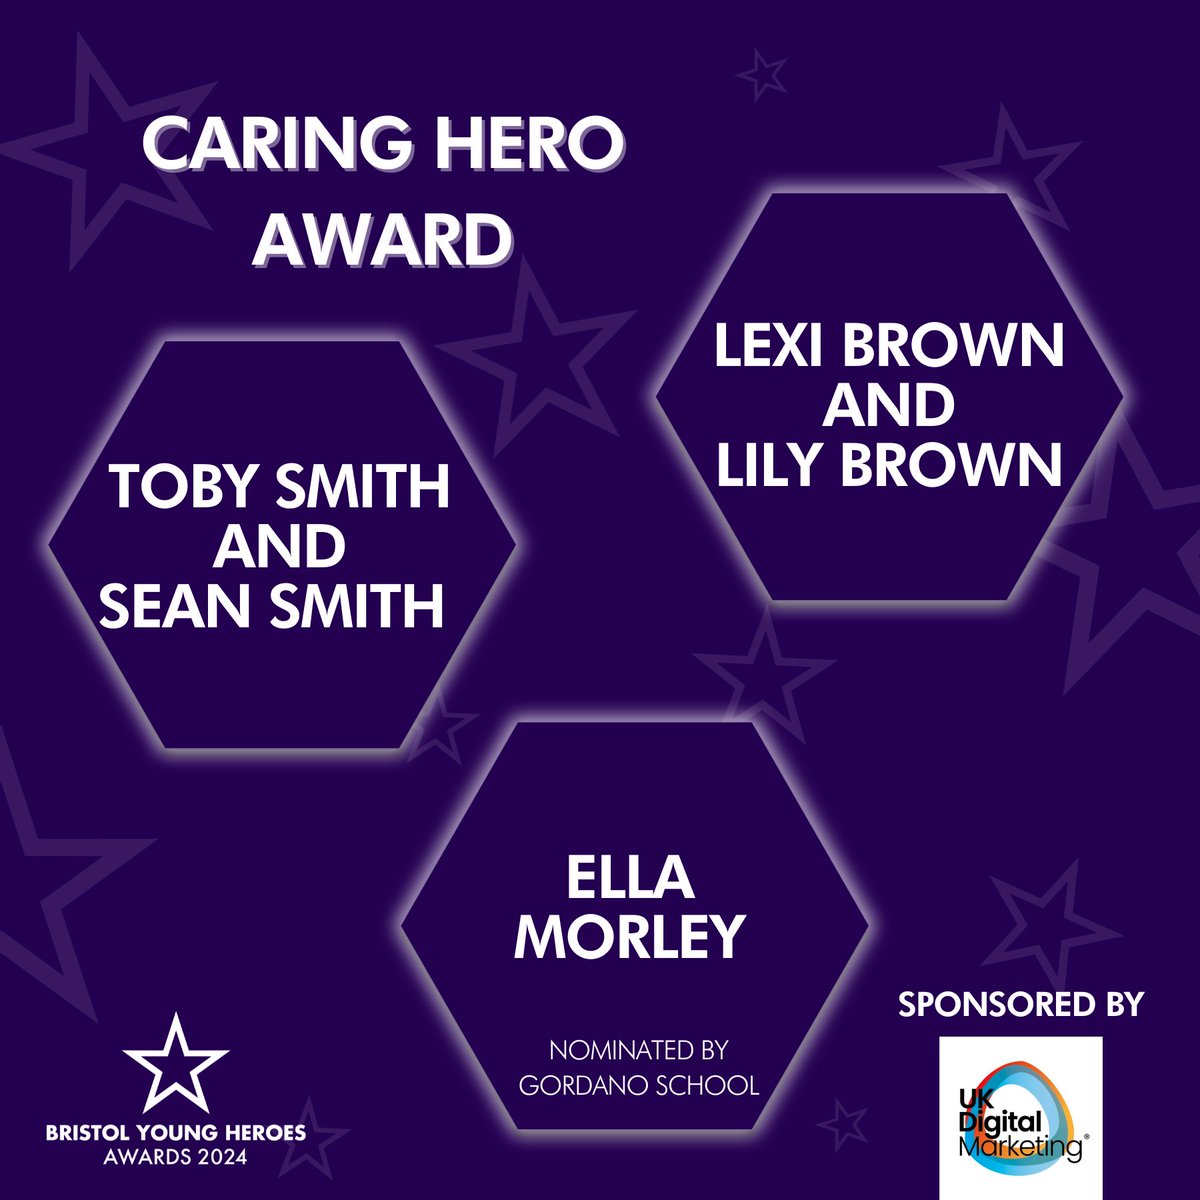 ✨Caring Hero Award✨ We are thrilled to announce the finalists for the Caring Hero Award are: 🌟 Toby Smith and Sean Smith 🌟 Lexi Brown and Lily Brown 🌟 Ella Morley Congratulations and best of luck 🤞 Thank you to @UKDigMarketing for sponsoring the Caring Hero Award 🙏